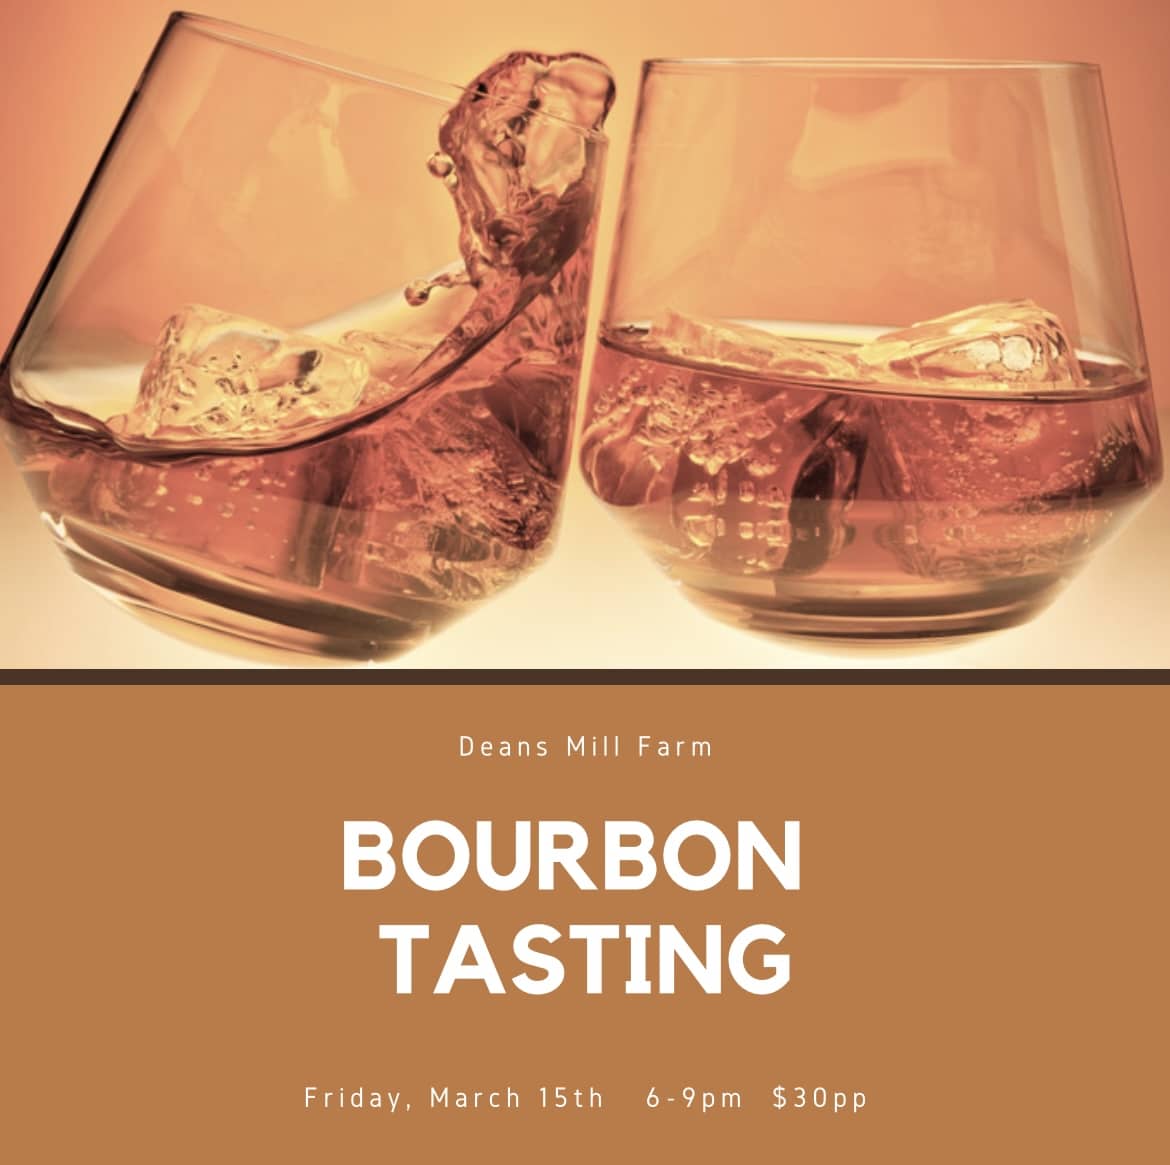 Bourbon Tasting: A Night of Music, Charcuterie, and Delight